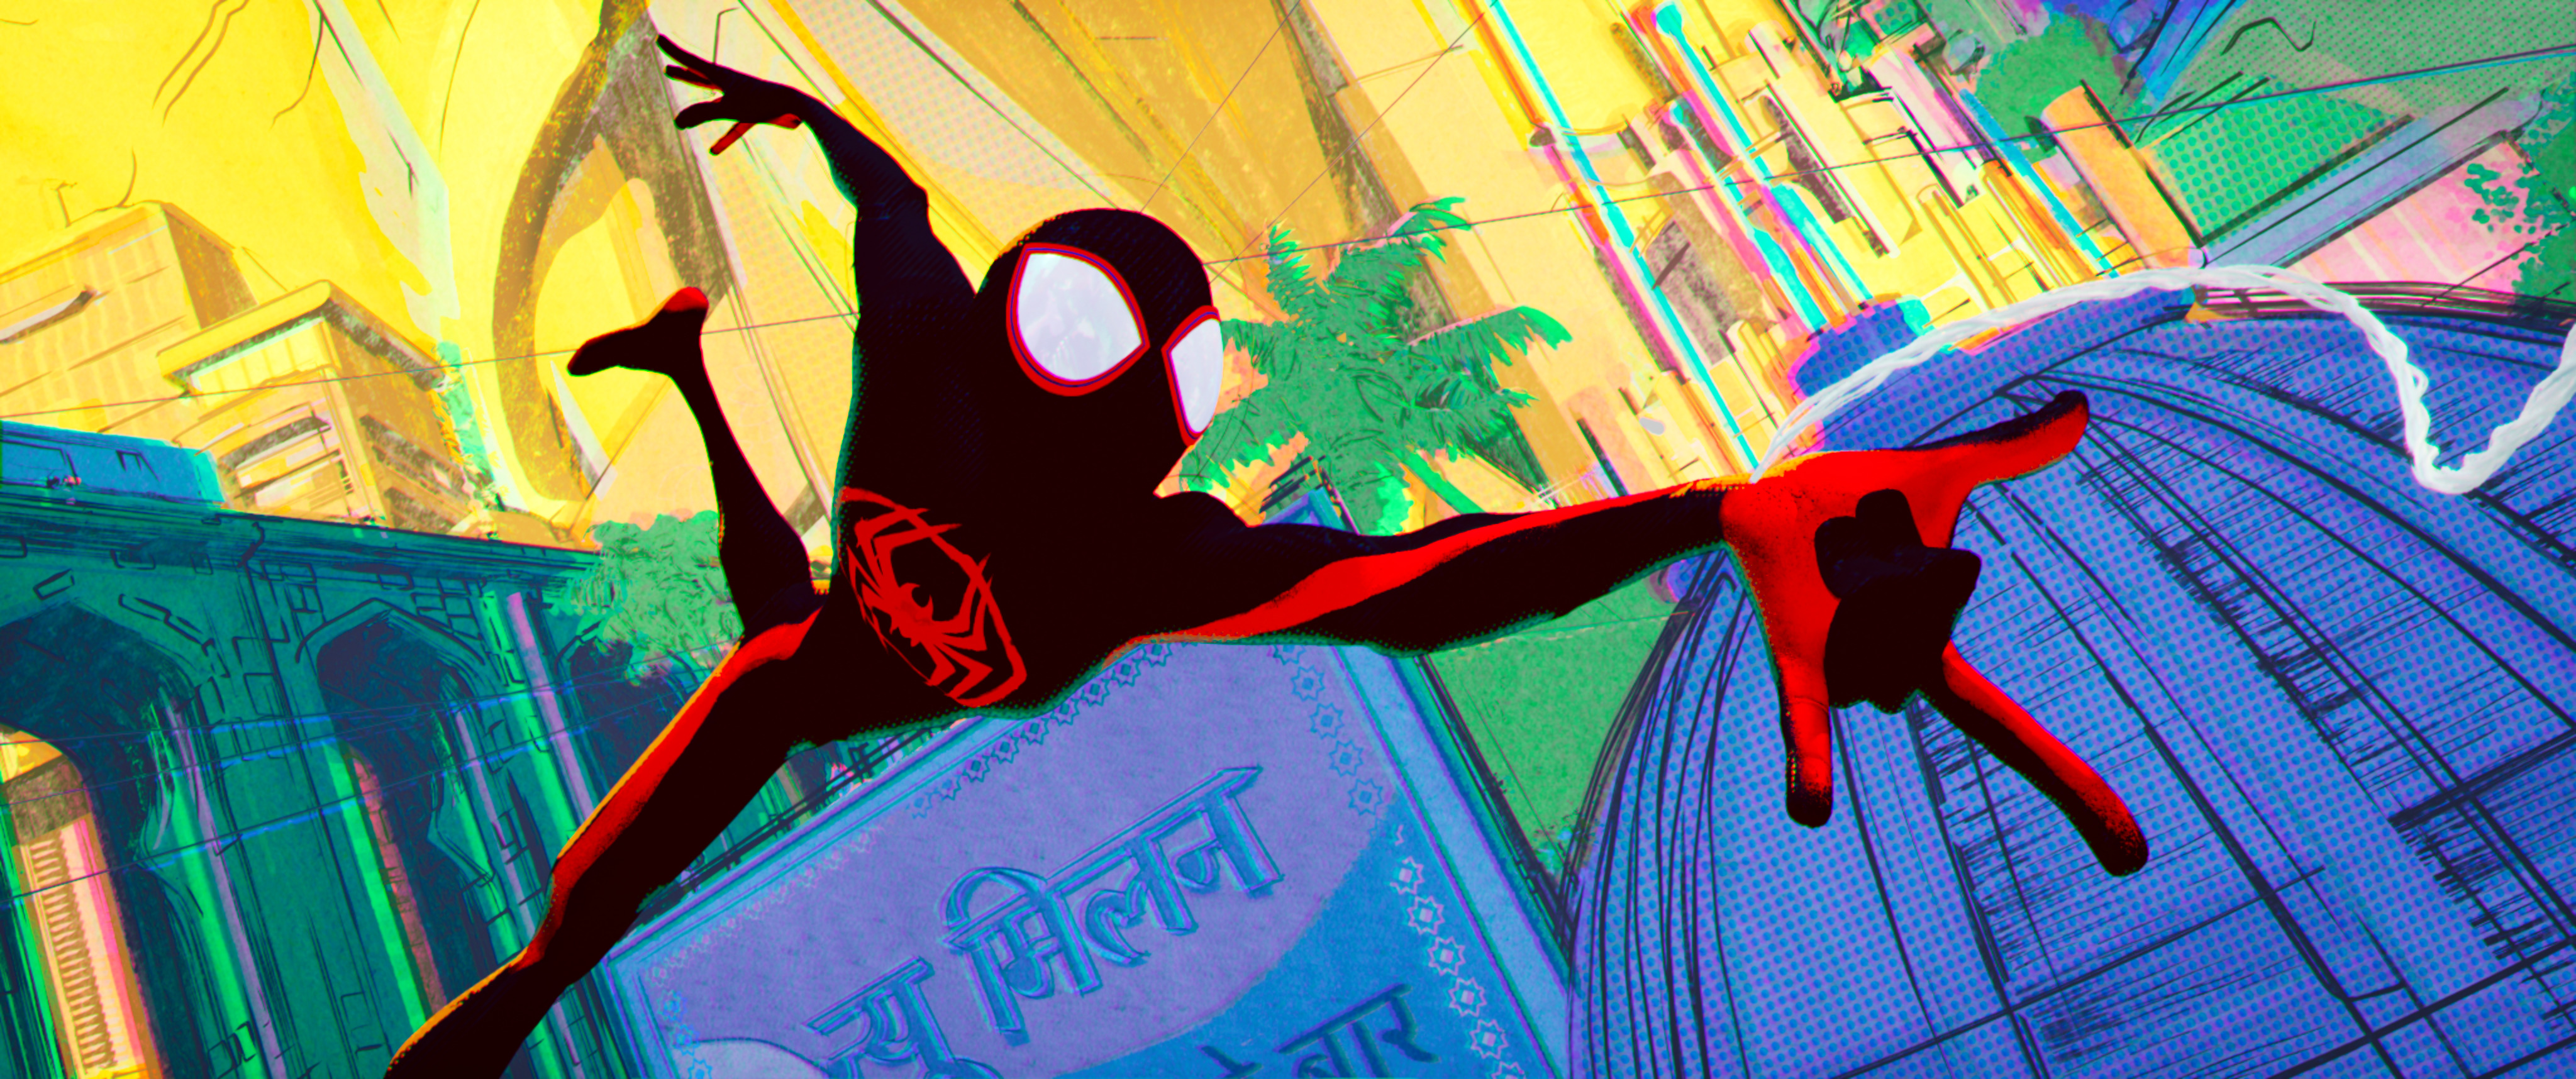 WE IN THE SPIDERVERSE FOREAL!!!